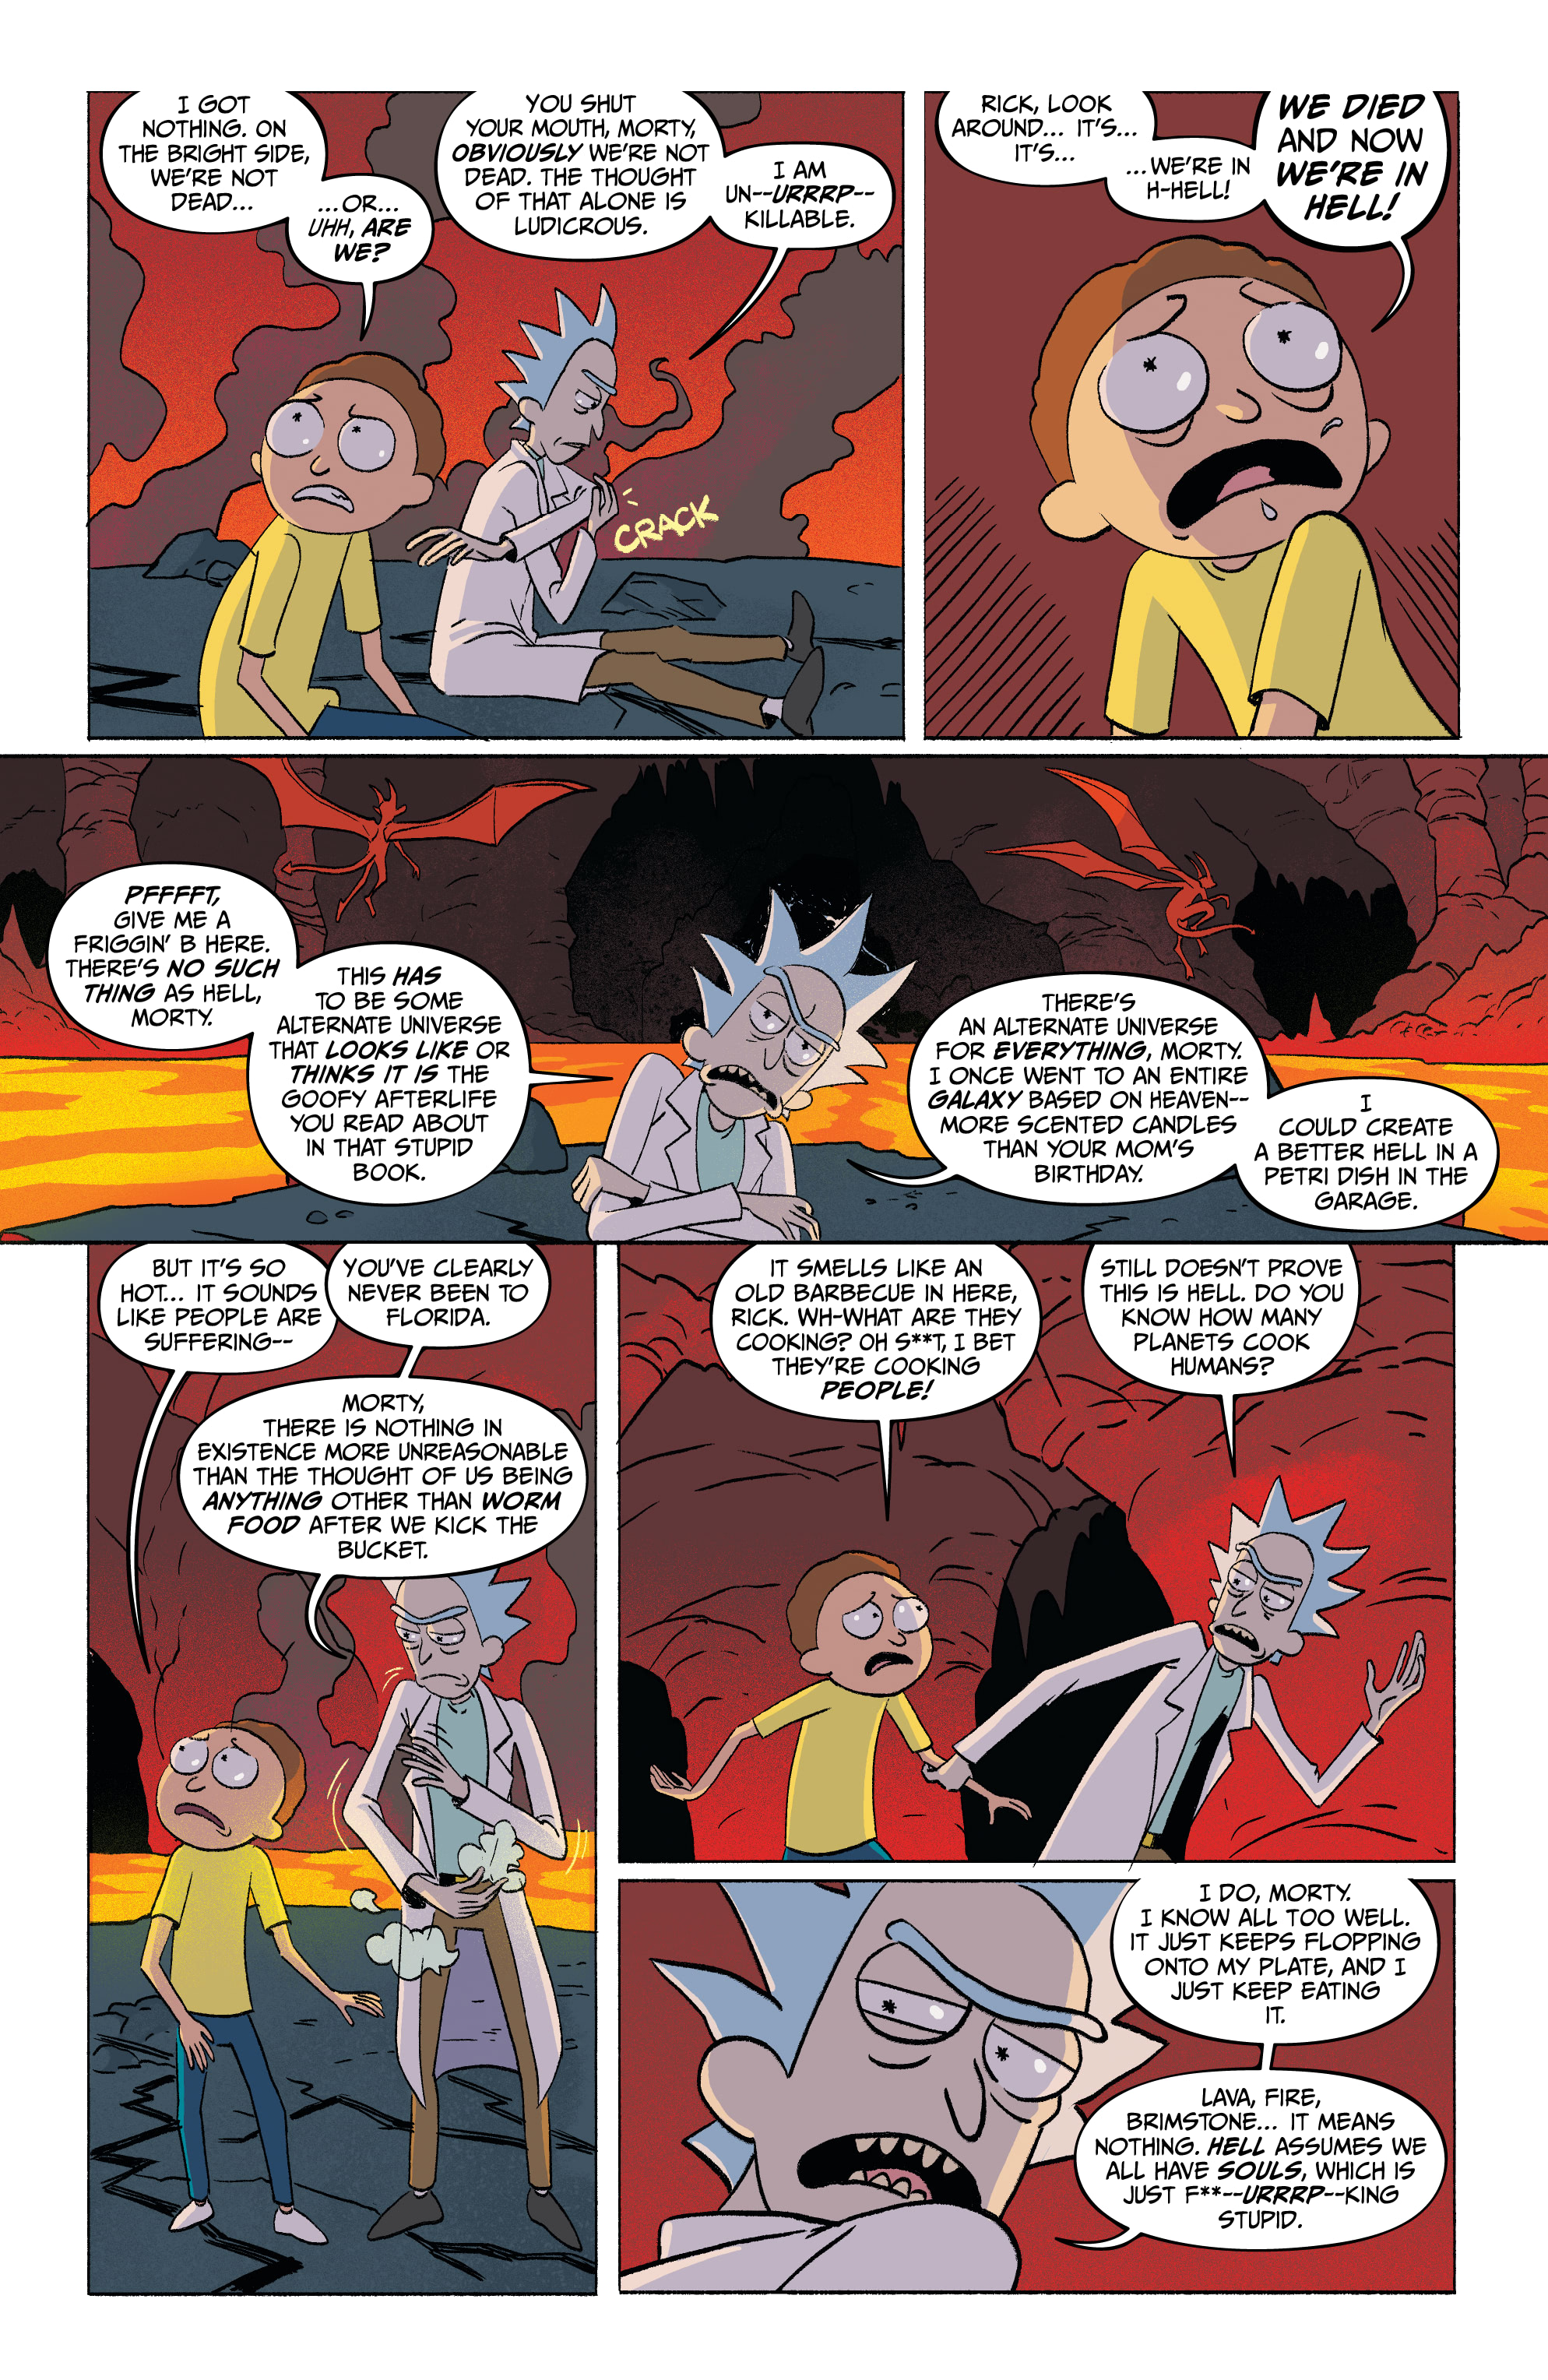 Rick and Morty: Go To Hell (2020-): Chapter 1 - Page 4